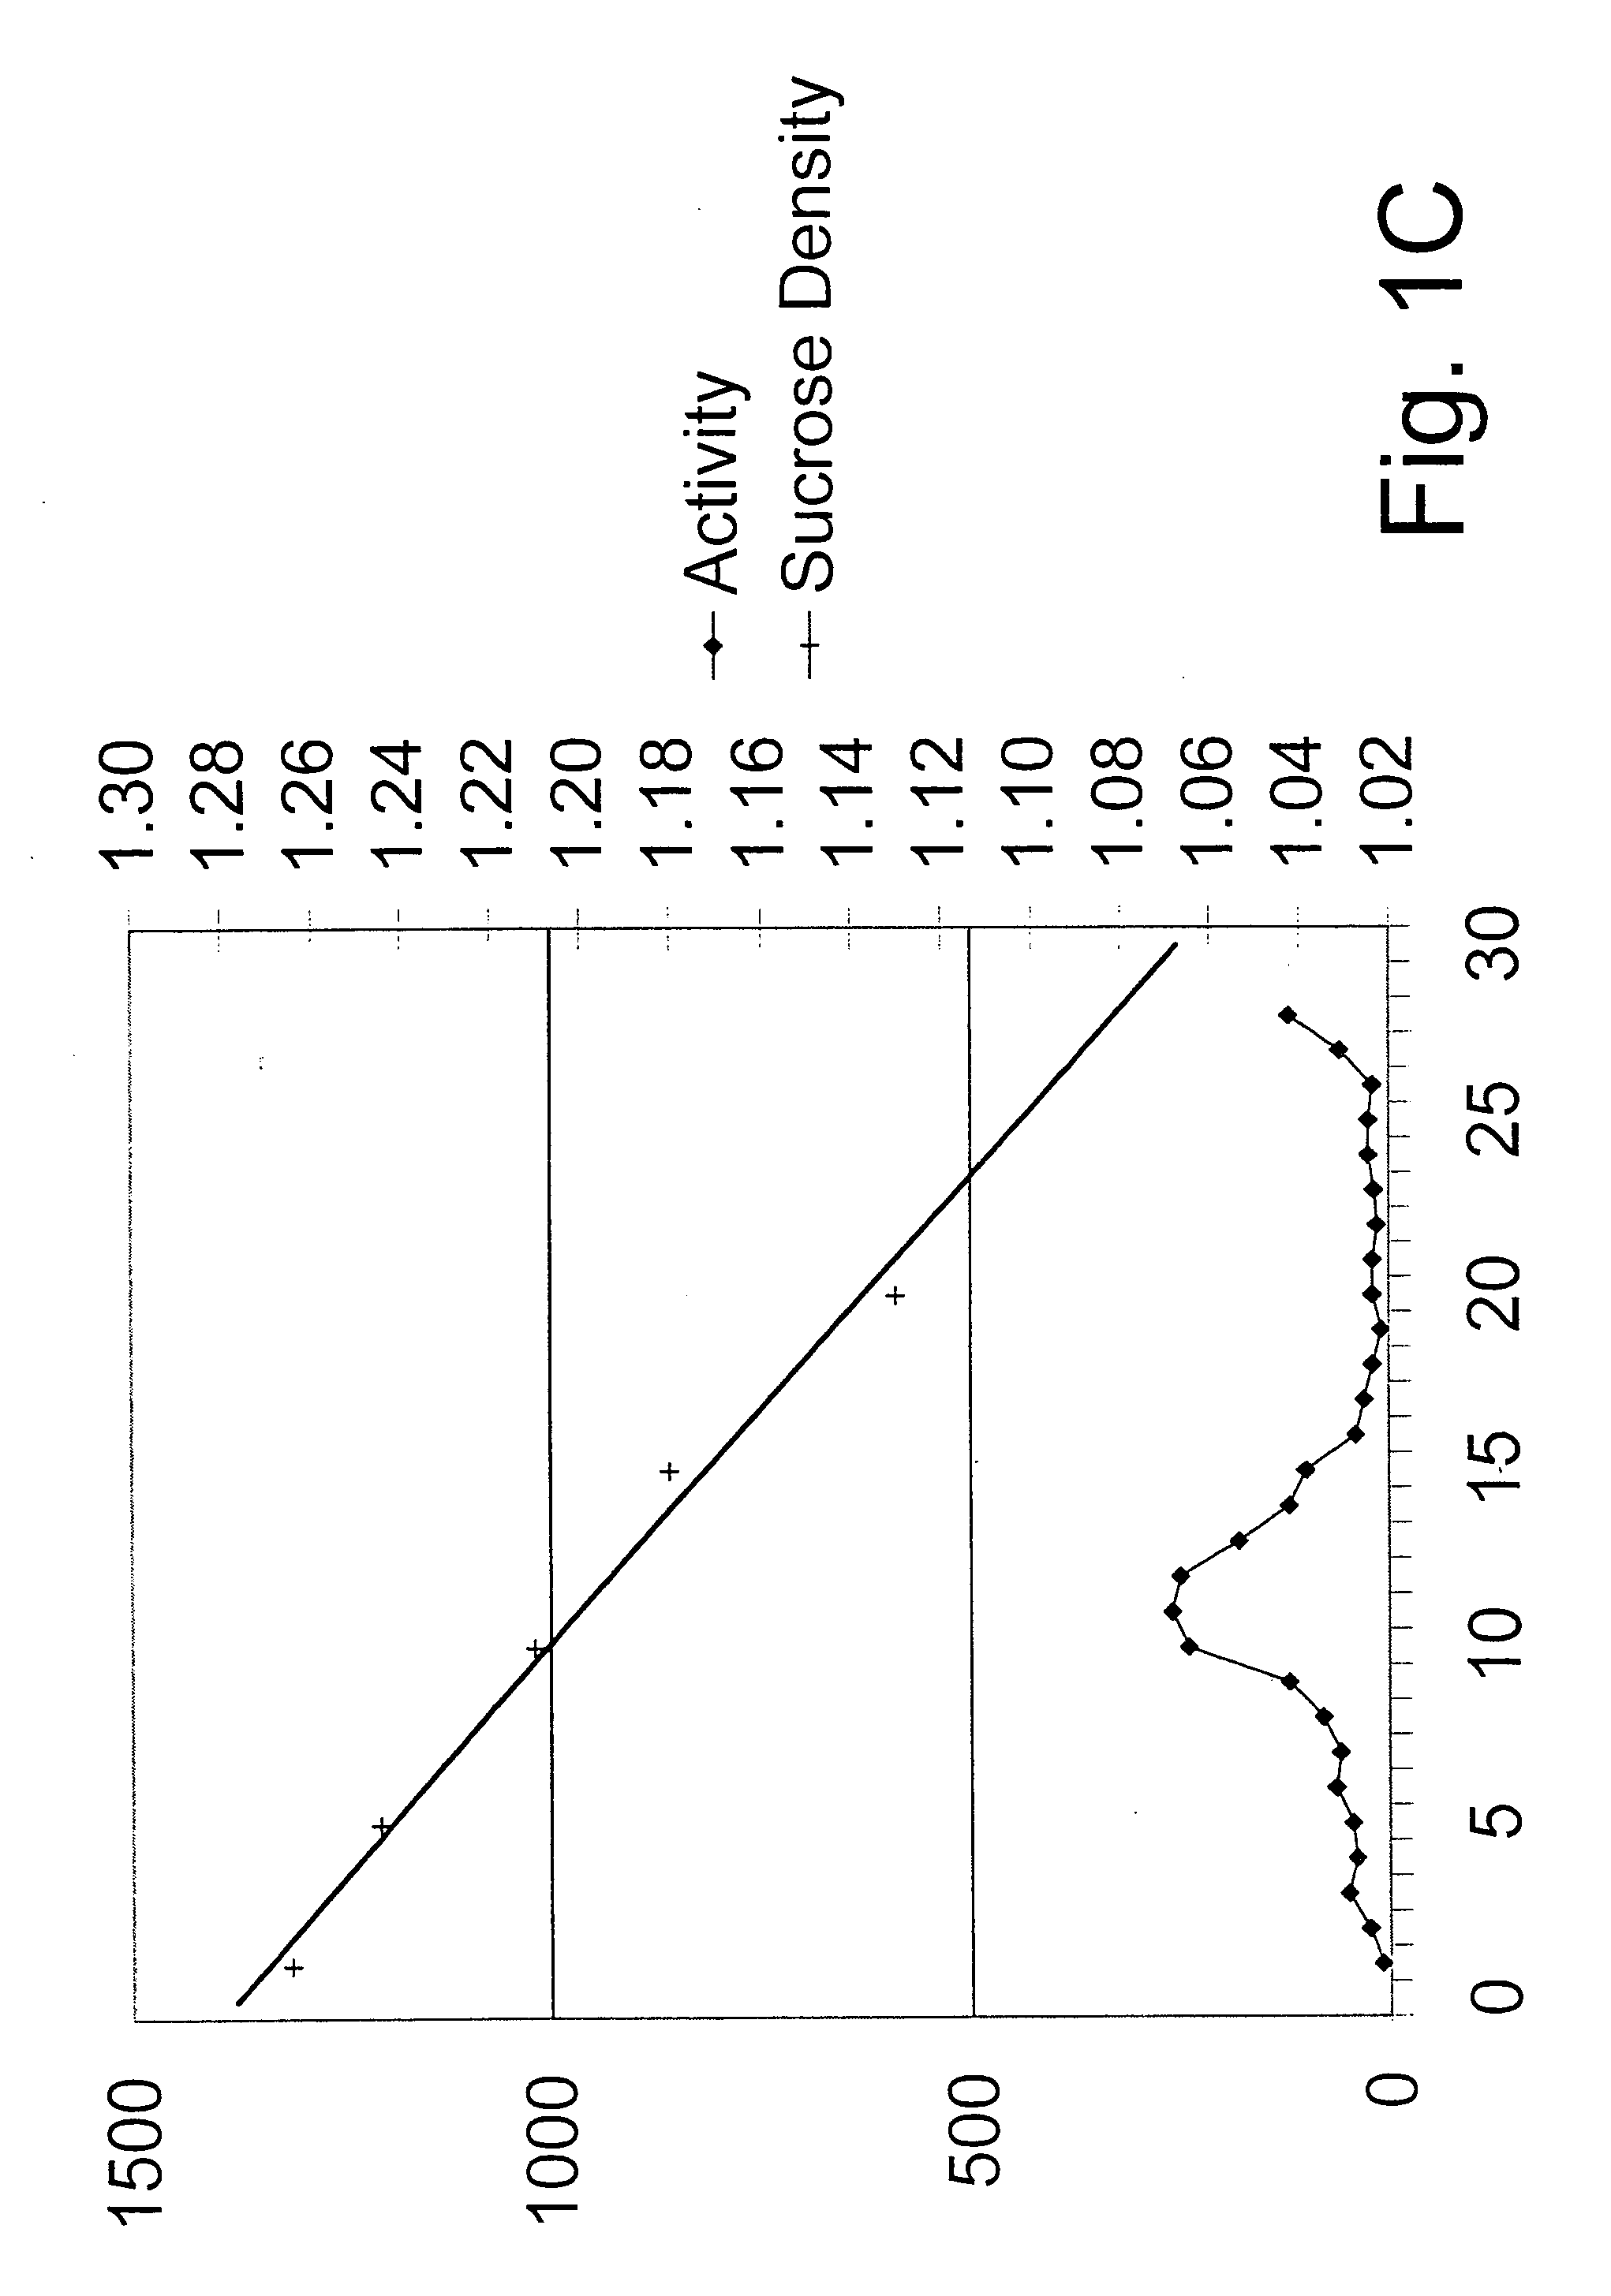 Combined treatments and methods for treatment of mycoplasma and mycoplasma-like organism infections